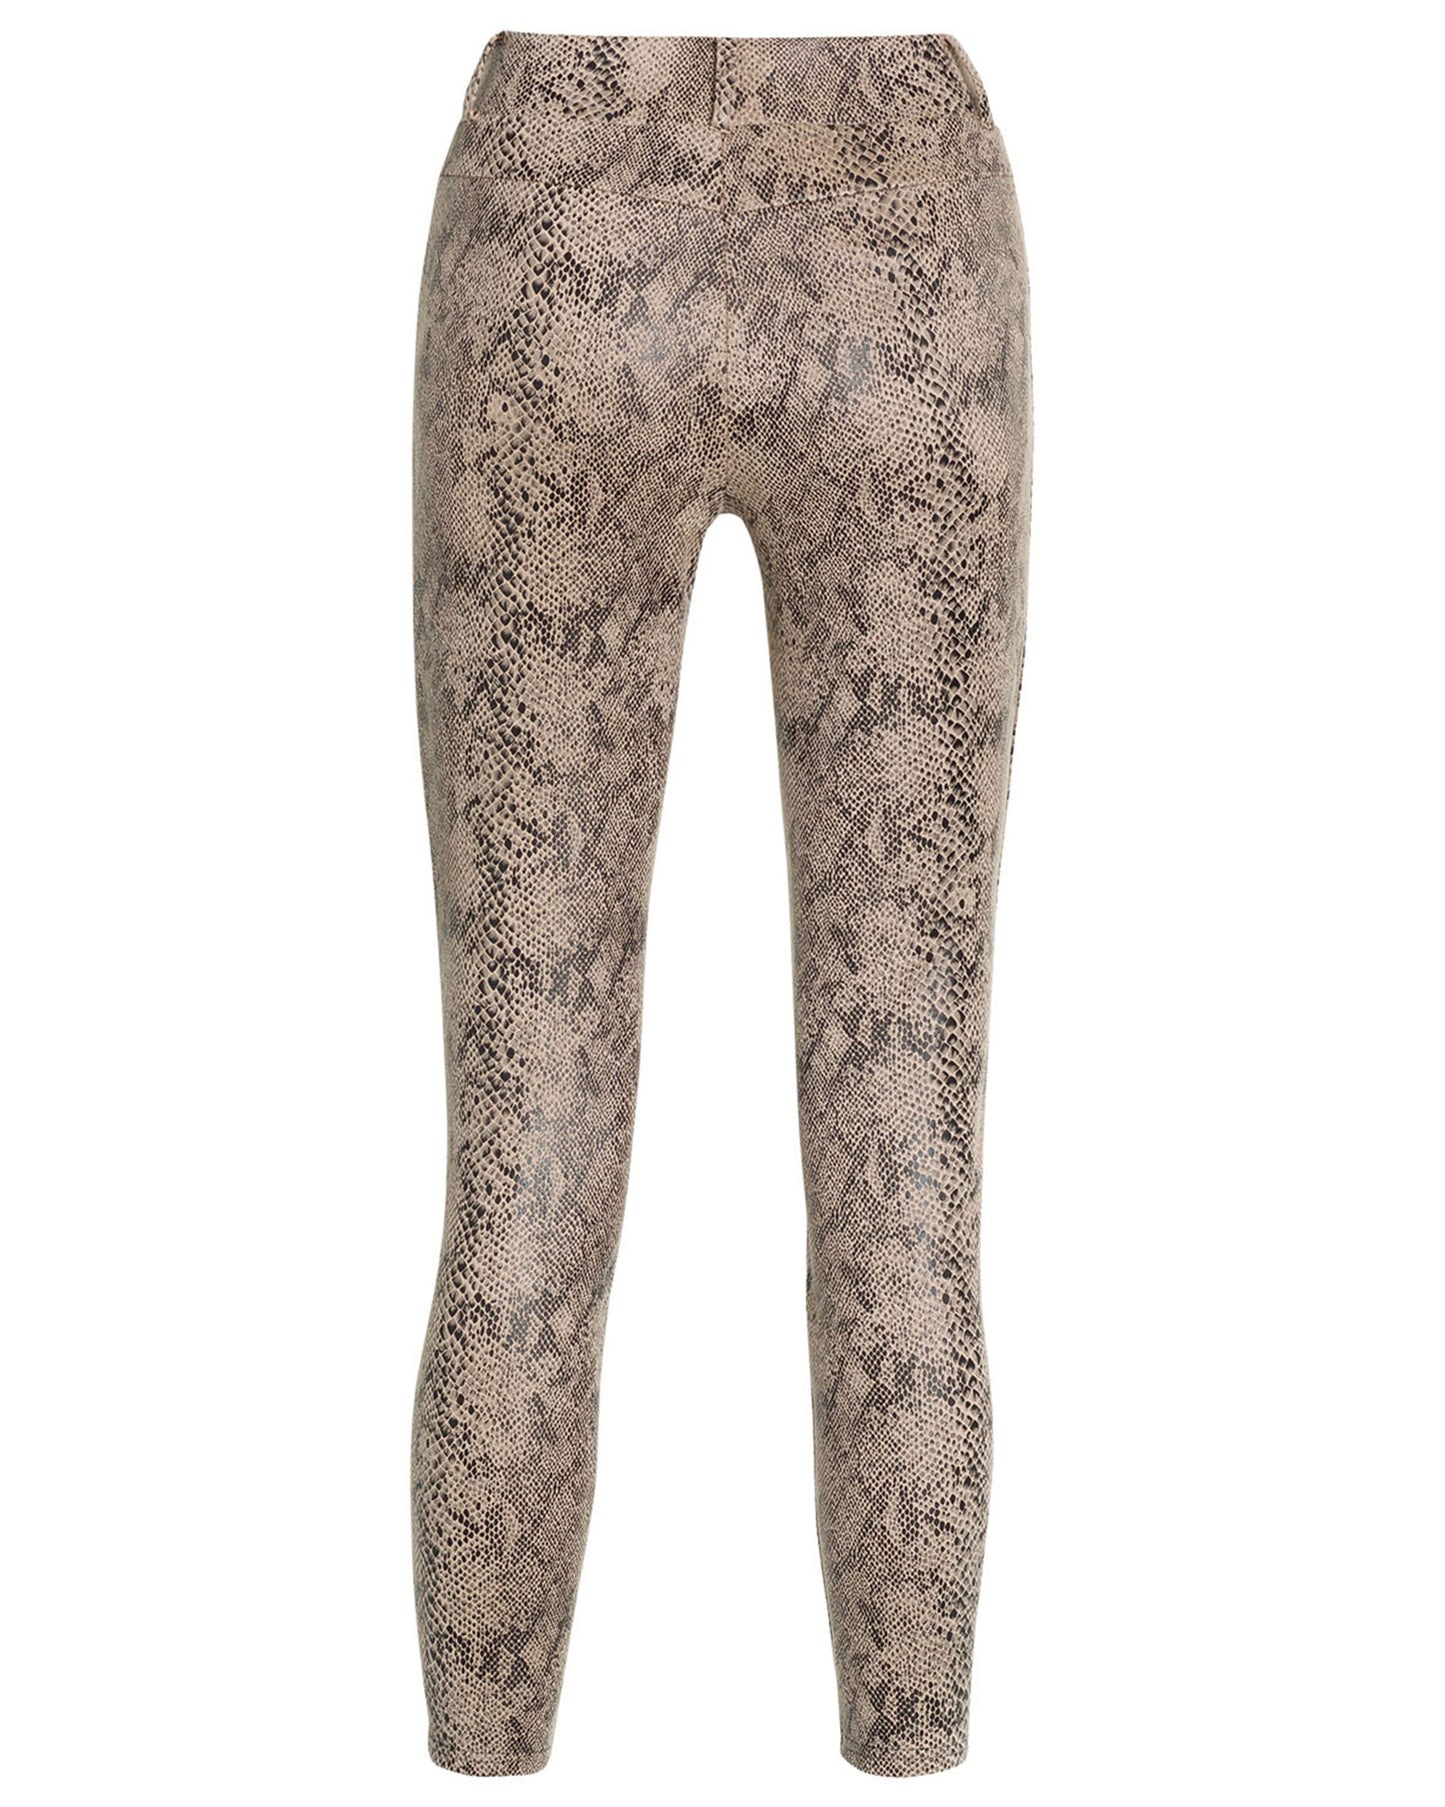 Ysabel Mora 70276 Leggings - Beige slimming trouser leggings (treggings) with an all over snake skin print style pattern, rear pockets, belt loops and black faux button closures. Back view